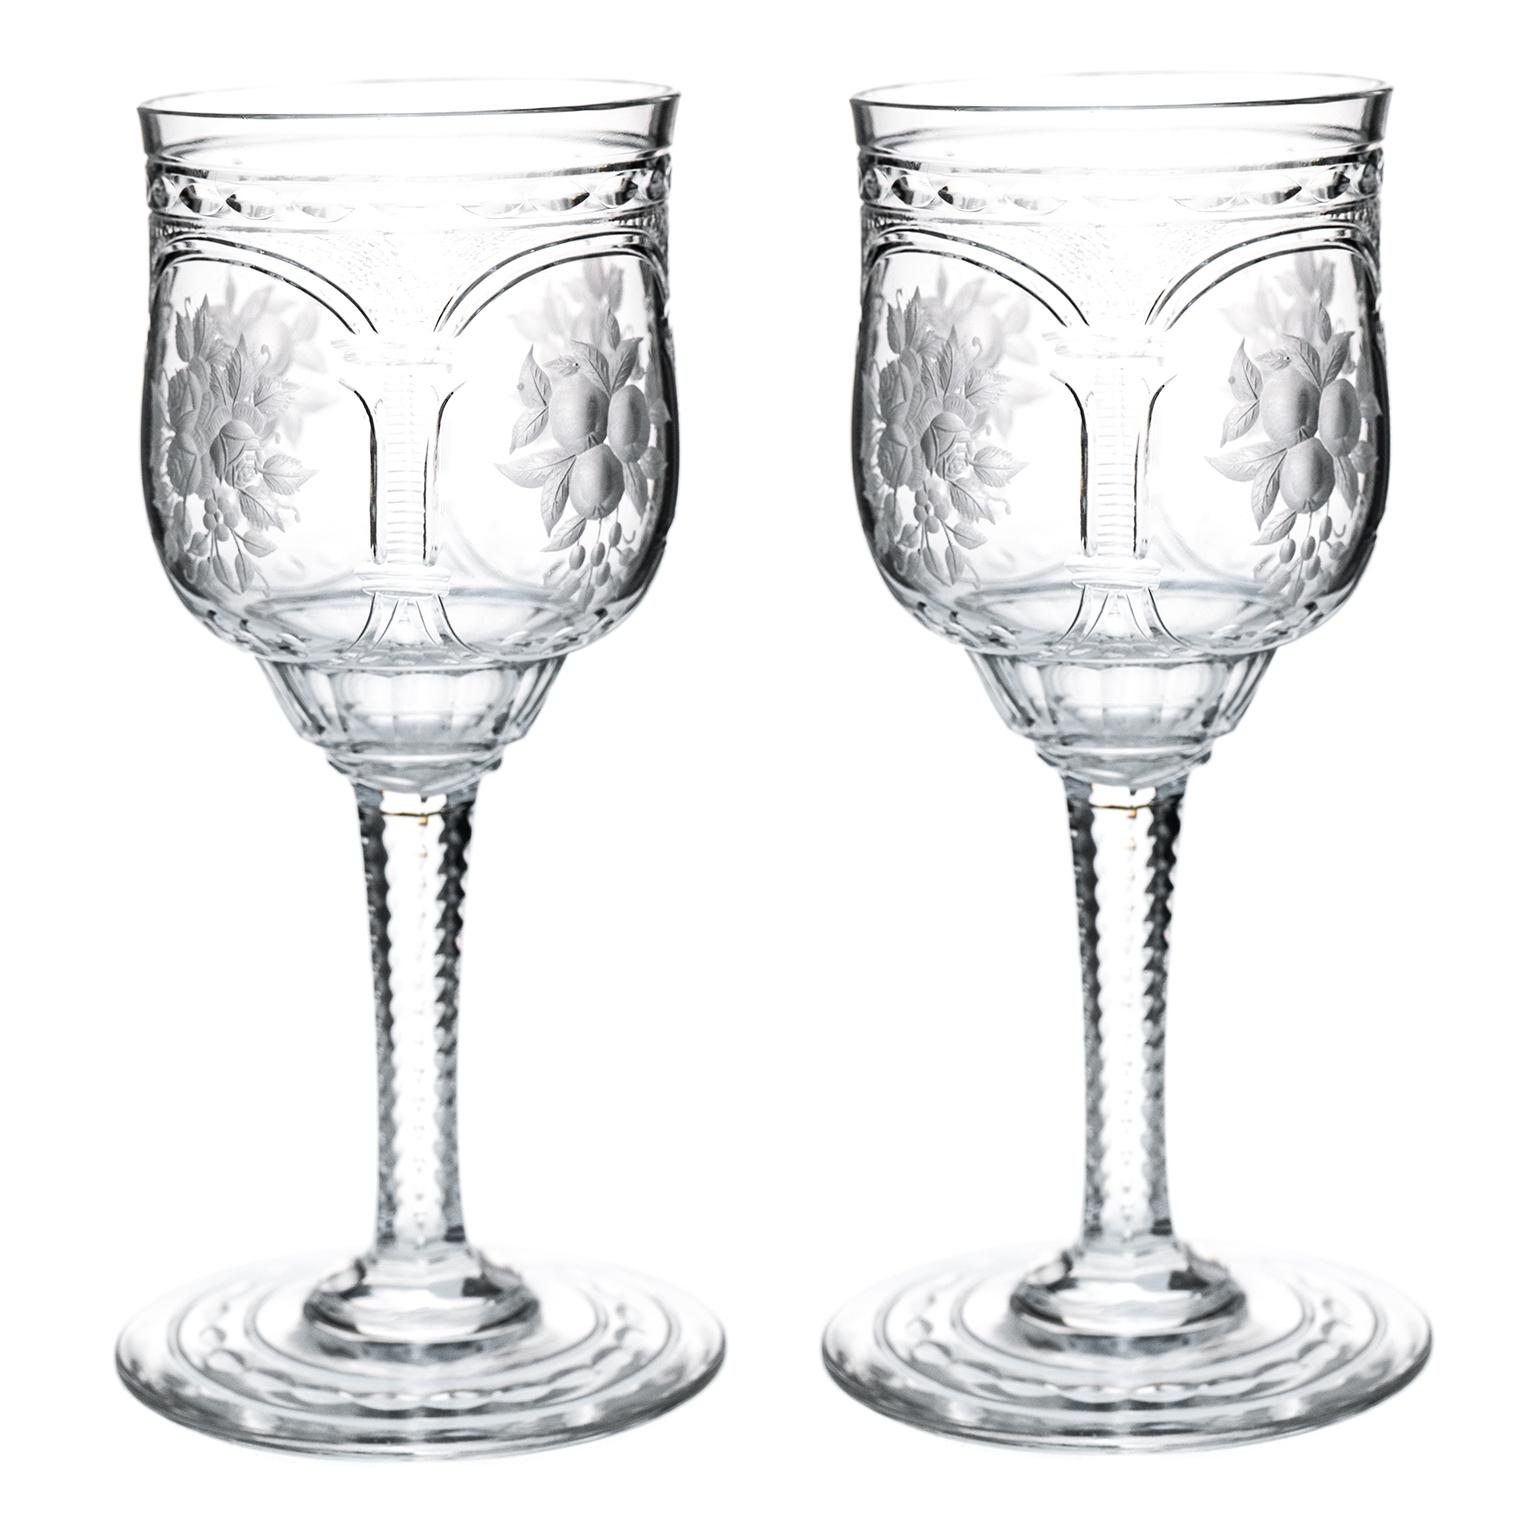 French Set of 11 Clear Baccarat Vallee Pattern Cordial Goblets c1900 by Baccarat